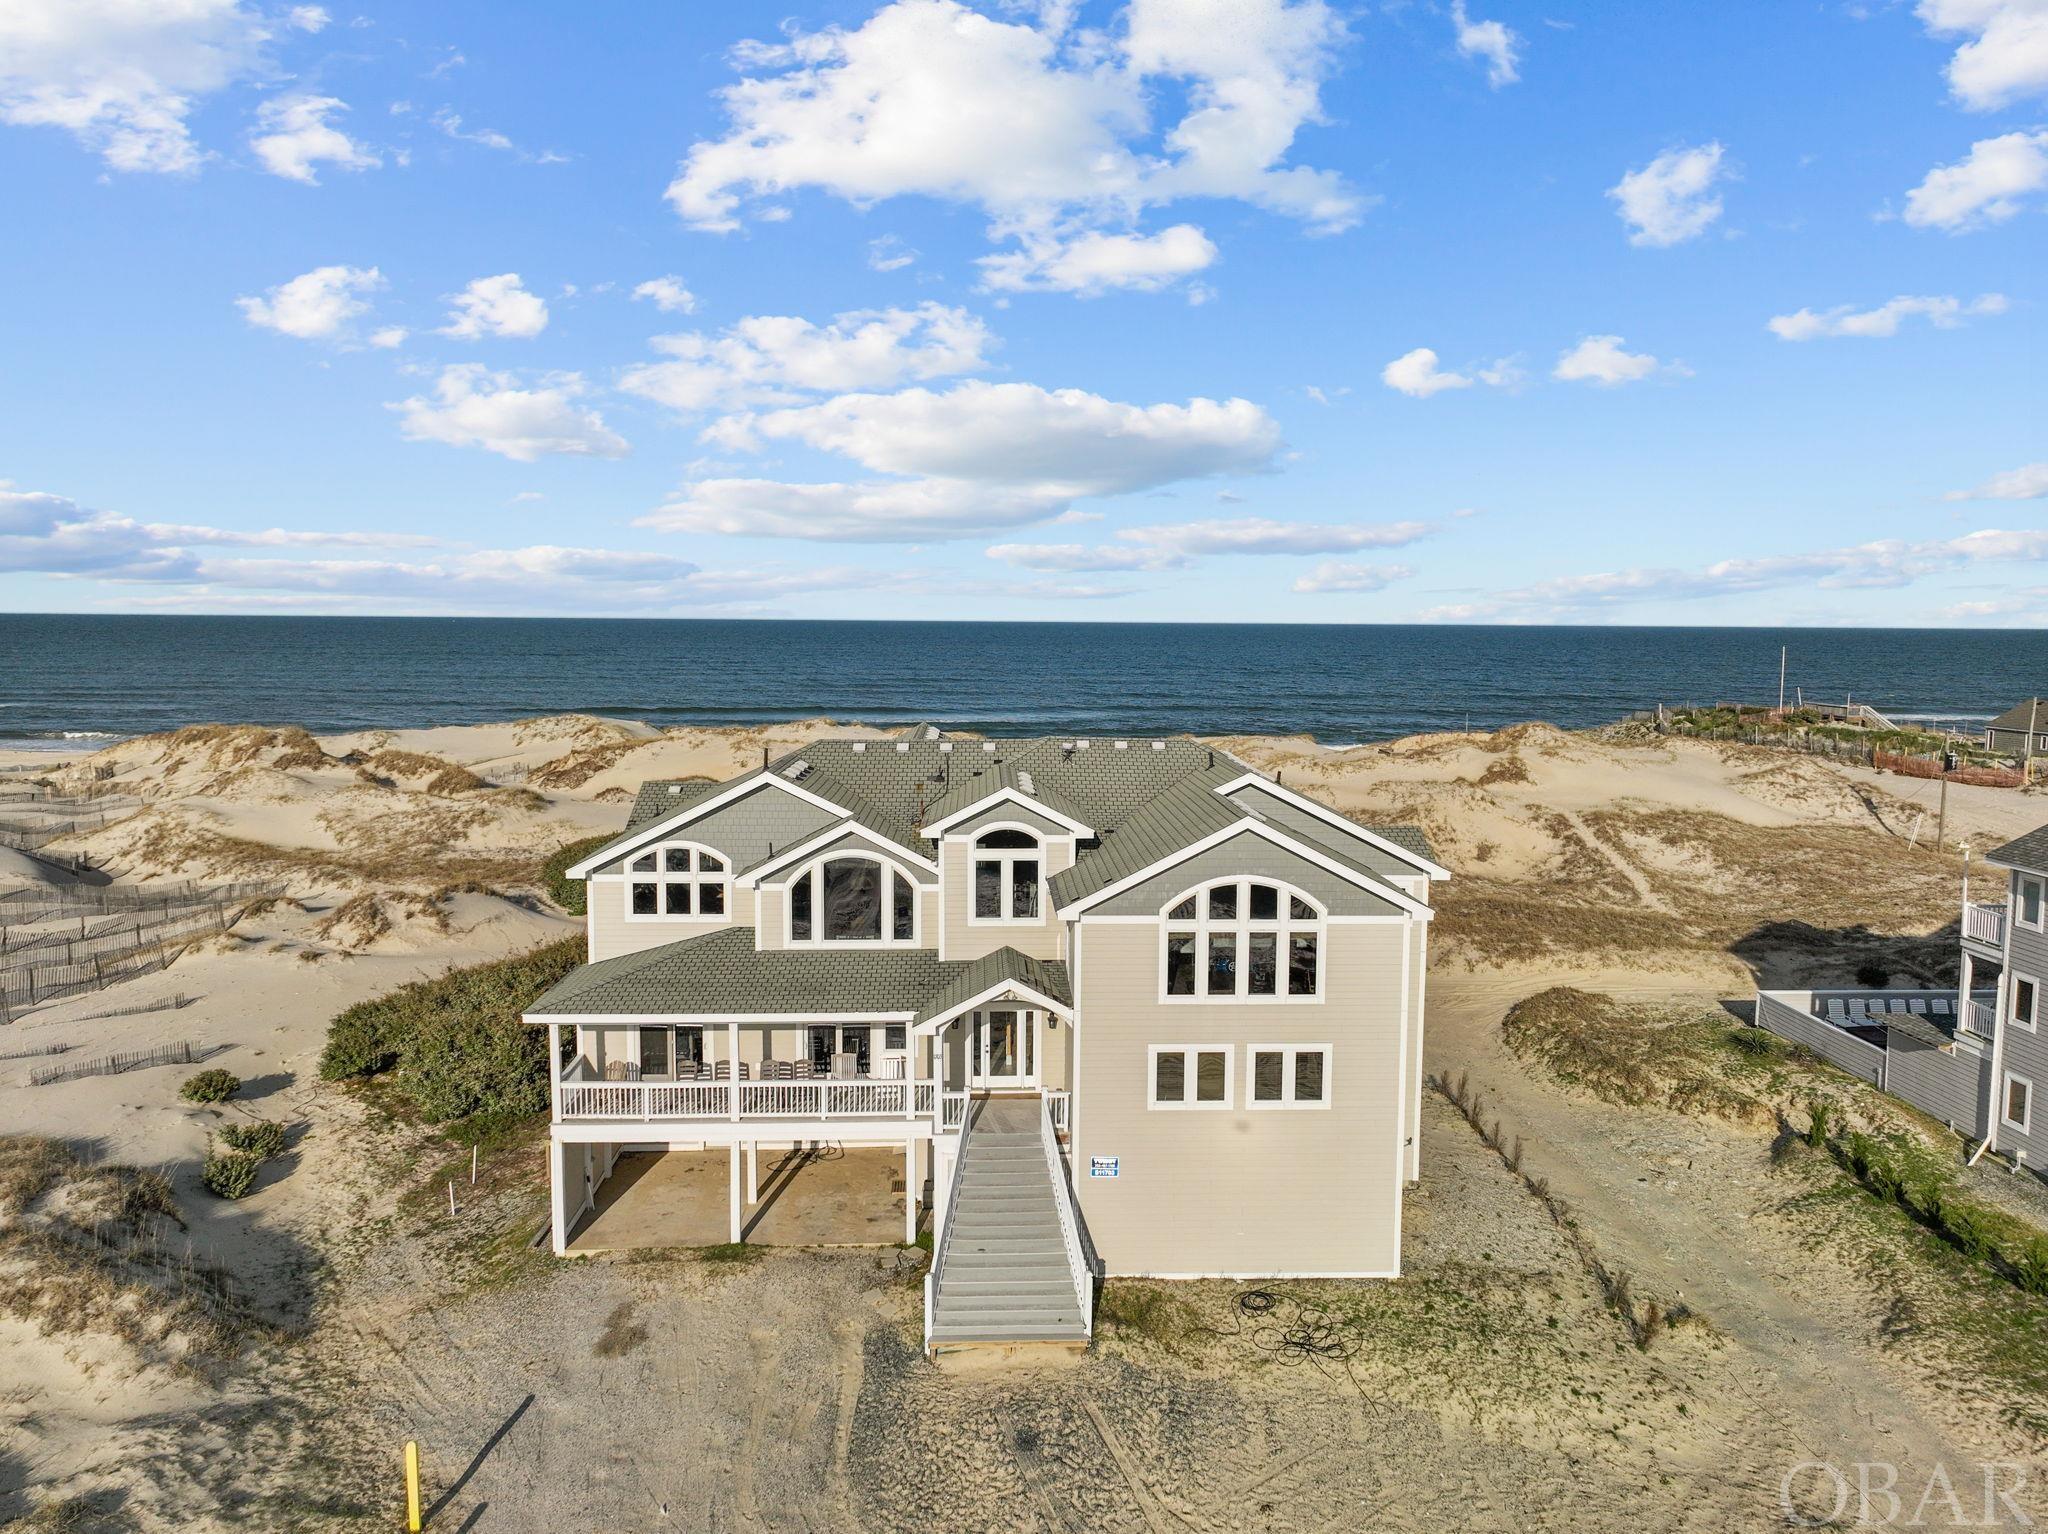 Indulge in the serene beauty of nature and sweeping ocean views in this grand oceanfront retreat situated on a 3-acre lot in the coveted 4x4 section of Corolla.  With almost 8000 square feet of living space, this home is meticulously designed to comfortably accommodate large gatherings while offering all the amenities required for a successful investment property. The top floor boasts an open and spacious layout, adorned with spectacular ocean views that you'll never tire of enjoying. The expansive kitchen is a chef's dream, equipped with three dishwashers, two microwaves, three ovens, two range tops, two sets of sinks, and an ice machine! Whether preparing meals for family and friends or hosting a beachfront feast, the ample dining space ensures everyone has a place at the table. The Great Room features a massive new sectional sofa, perfect for unwinding while soaking in the breathtaking ocean vistas. Entertainment abounds within this luxurious retreat. Enjoy movie nights in the state-of-the-art theater room, challenge friends to games in the two spacious game rooms, or find solace in the mid-level den/office. Outside, a private oceanfront pool and two hot tubs beckon relaxation, while multiple decks offer idyllic spots for savoring sunrises or stargazing. The ground level game room is a hub of activity, opening out to the oceanfront pool area and equipped with a convenient kitchenette, pool table, ping pong table, and foosball table. It's likely this space inspired the cottage name "Straight on 'Til Morning" where endless fun and memories await! Each of the twelve bedrooms offers spacious comfort and features en-suite baths, with some boasting decks offering ocean and pool views. This home truly offers all the comforts and conveniences expected for an amazing investment opportunity in the sought-after 4x4 beaches of Corolla, renowned for its majestic wild horses. Don't miss this unparalleled opportunity to own a piece of paradise where luxury meets coastal charm. Schedule a viewing today and experience the epitome of beachfront living in Corolla's pristine 4x4 beaches. Recent improvements include: LVP flooring in Game Room (2024), sound system updated to an integrated Sonos System throughout the home (2024), new Deck/Pool furniture (2023/2024), new manifold and pump equipment for well water, new sensors and piping (2023), hot water heater (2022), one HVAC replaced (2022), entire interior of home painted (2021). Pool upgrades - filter head, new 1 horsepower pump and misc plumbing parts estimated at $4800 scheduled to be completed April/May 2024